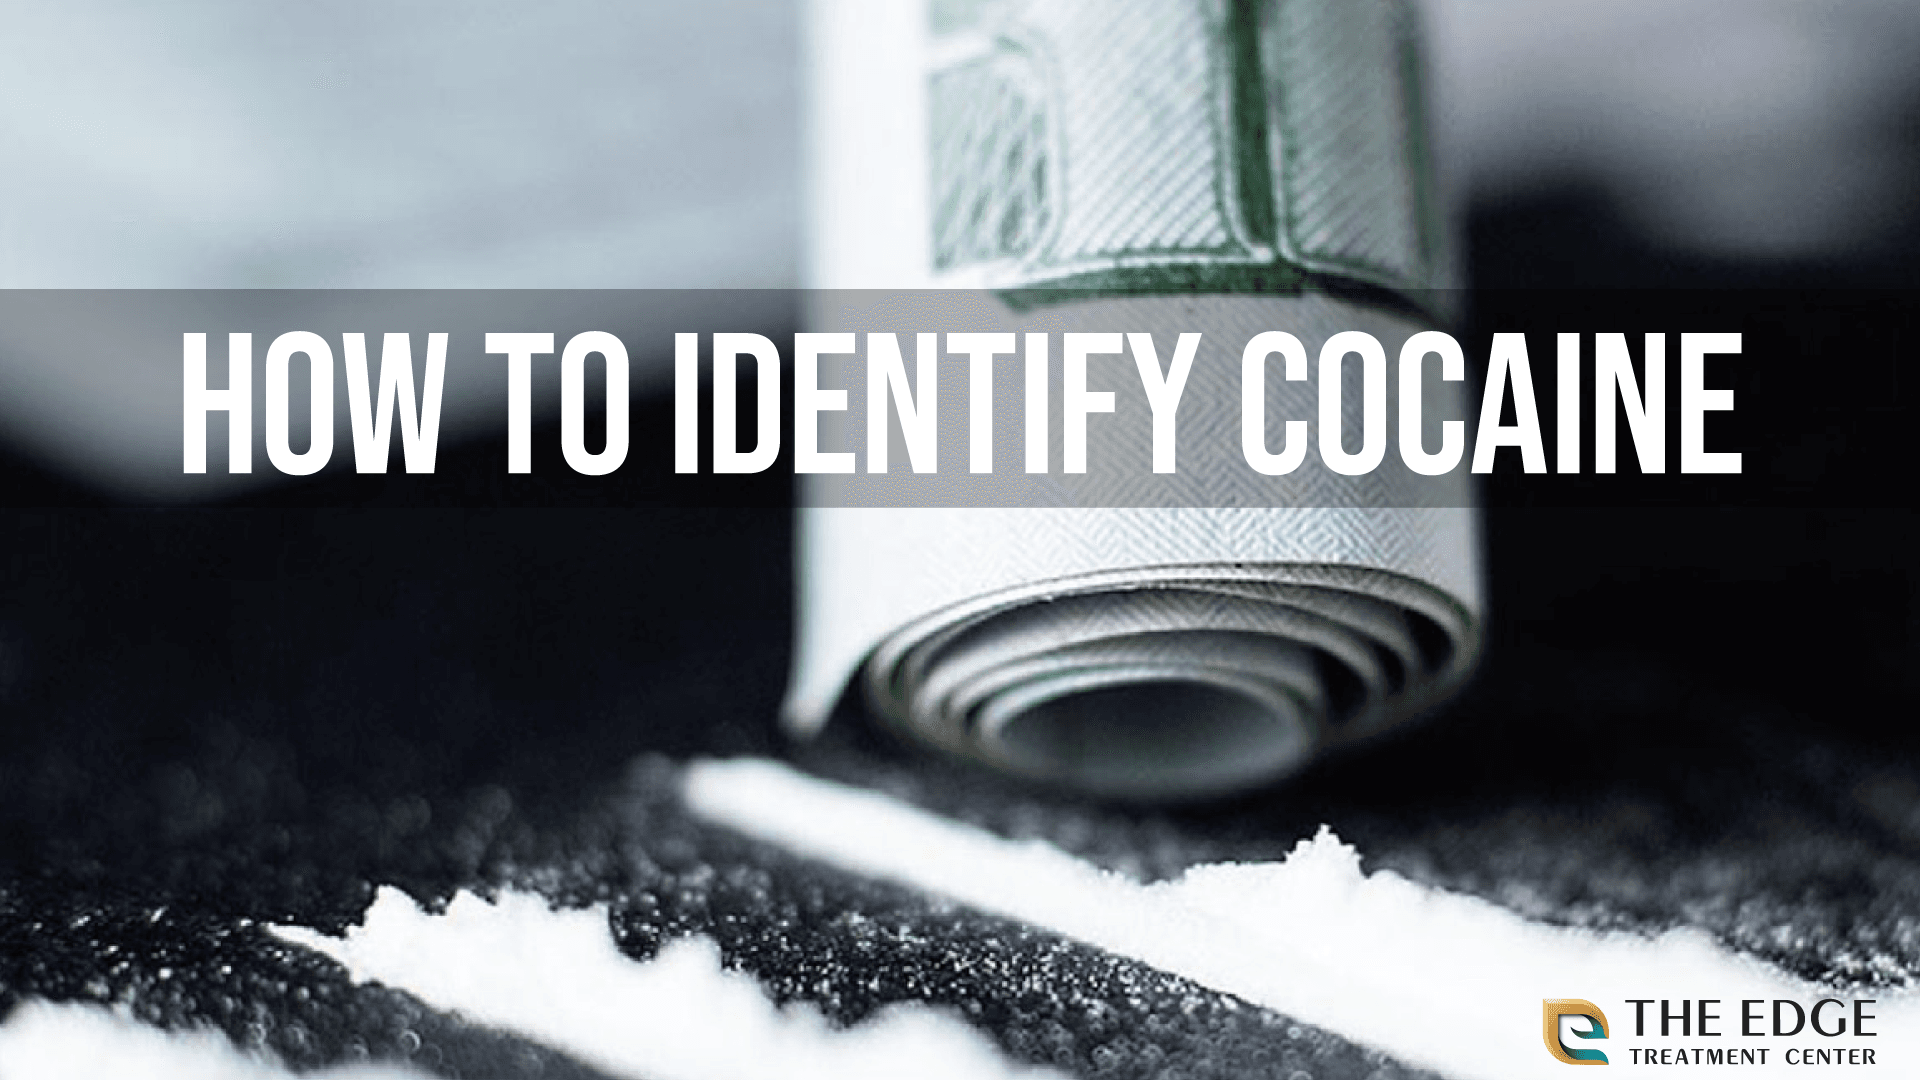 Cocaine: what are the effects? 